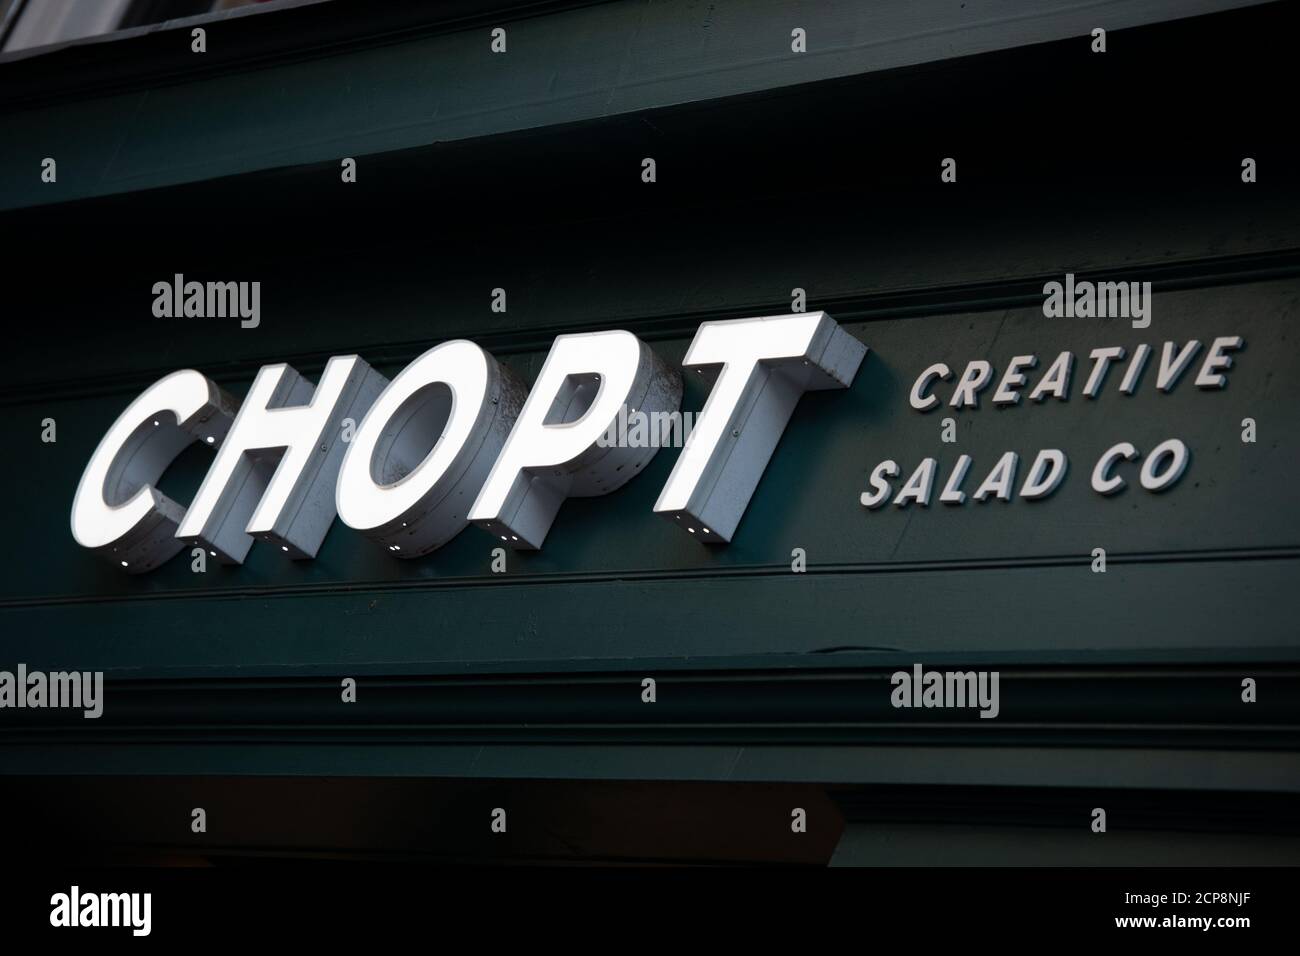 Washington, USA. 18th Sep, 2020. A general view of a Chopt logo on a storefront in Washington, DC, on September 18, 2020 amid the coronavirus pandemic. As Congress continues its deadlock and finger pointing over additional COVID-19 stimulus relief, Senate Majority Leader Mitch McConnell vowed to push a vote for a Supreme Court Nominee after the passing of Justice Ruth Bader Ginsburg earlier in the day. (Graeme Sloan/Sipa USA) Credit: Sipa USA/Alamy Live News Stock Photo